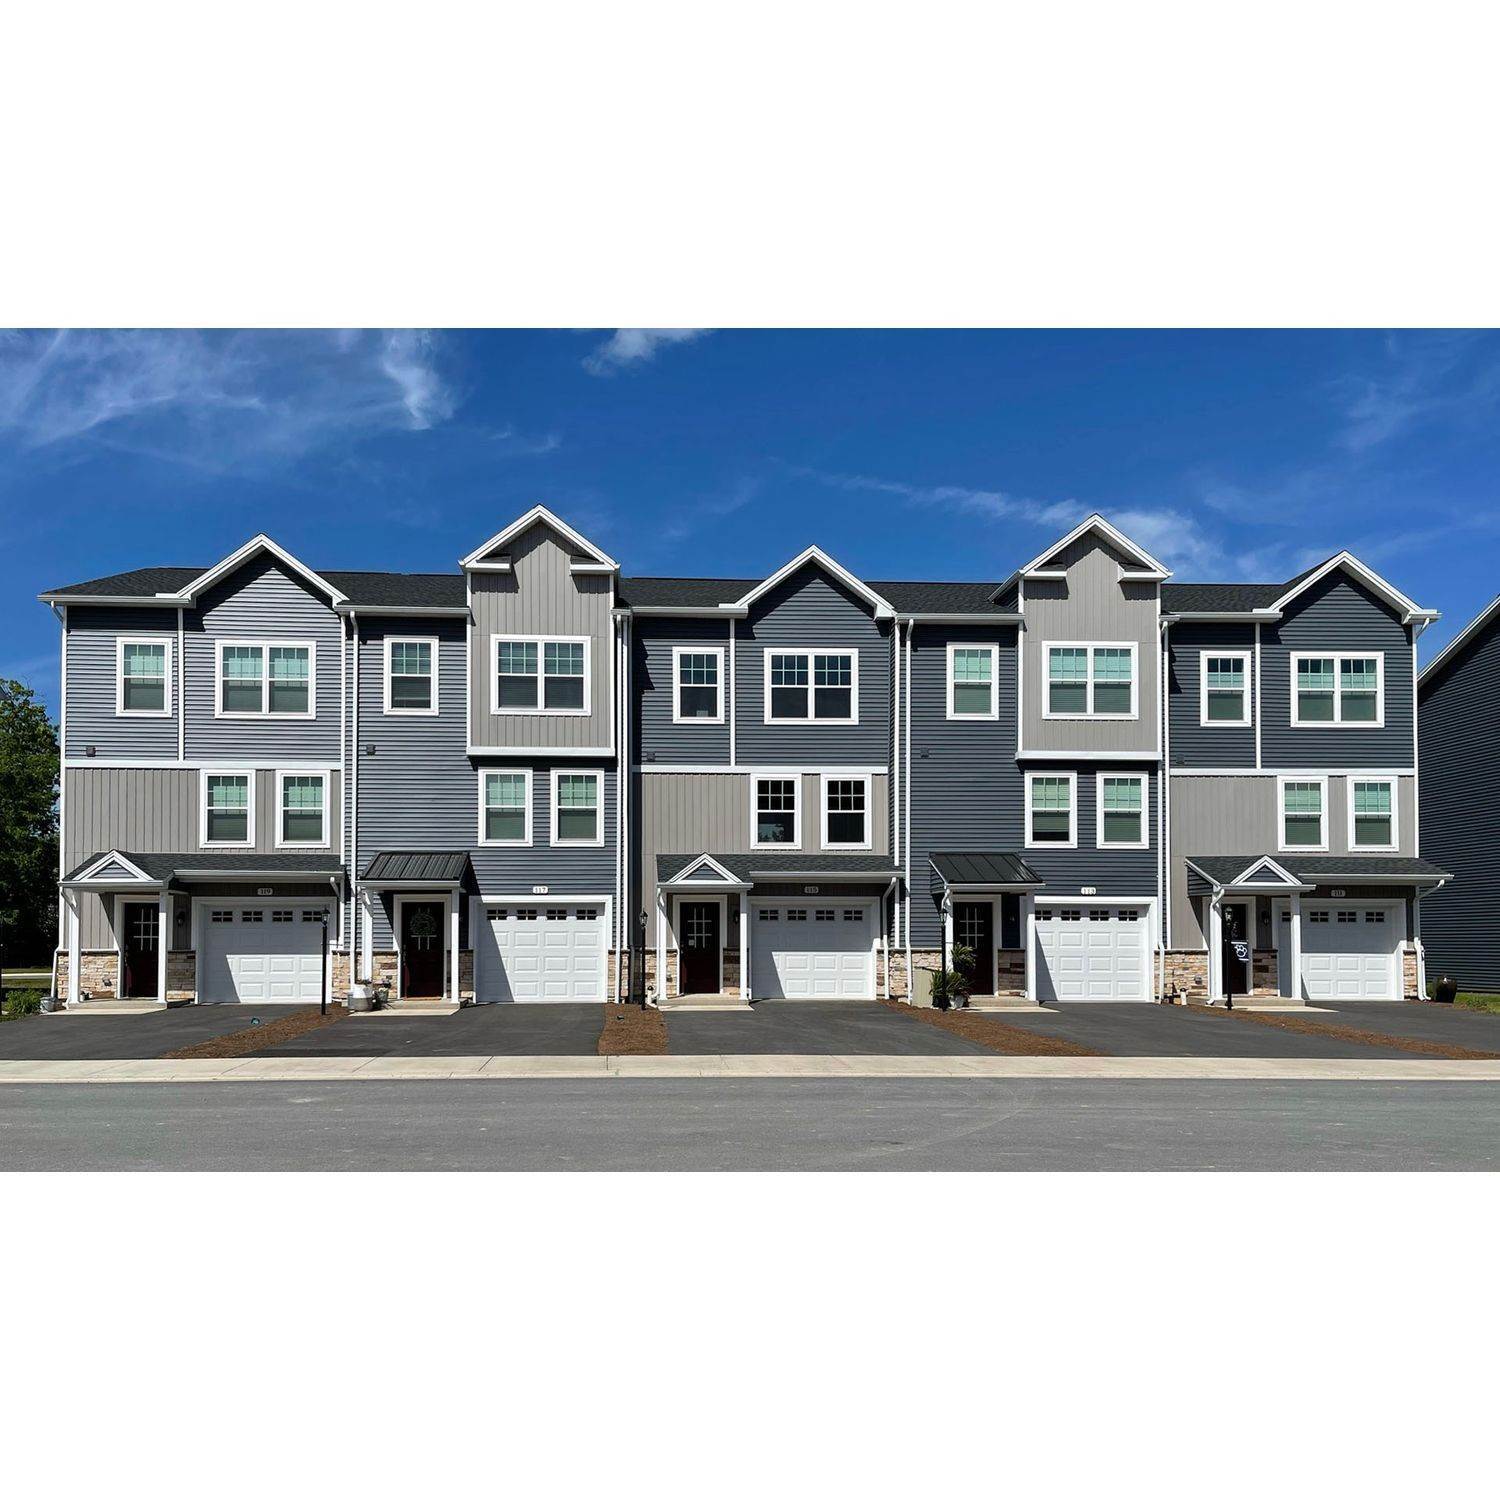 7. Grays Pointe - Townhomes building at 115 Amicus Drive, Port Matilda, PA 16870